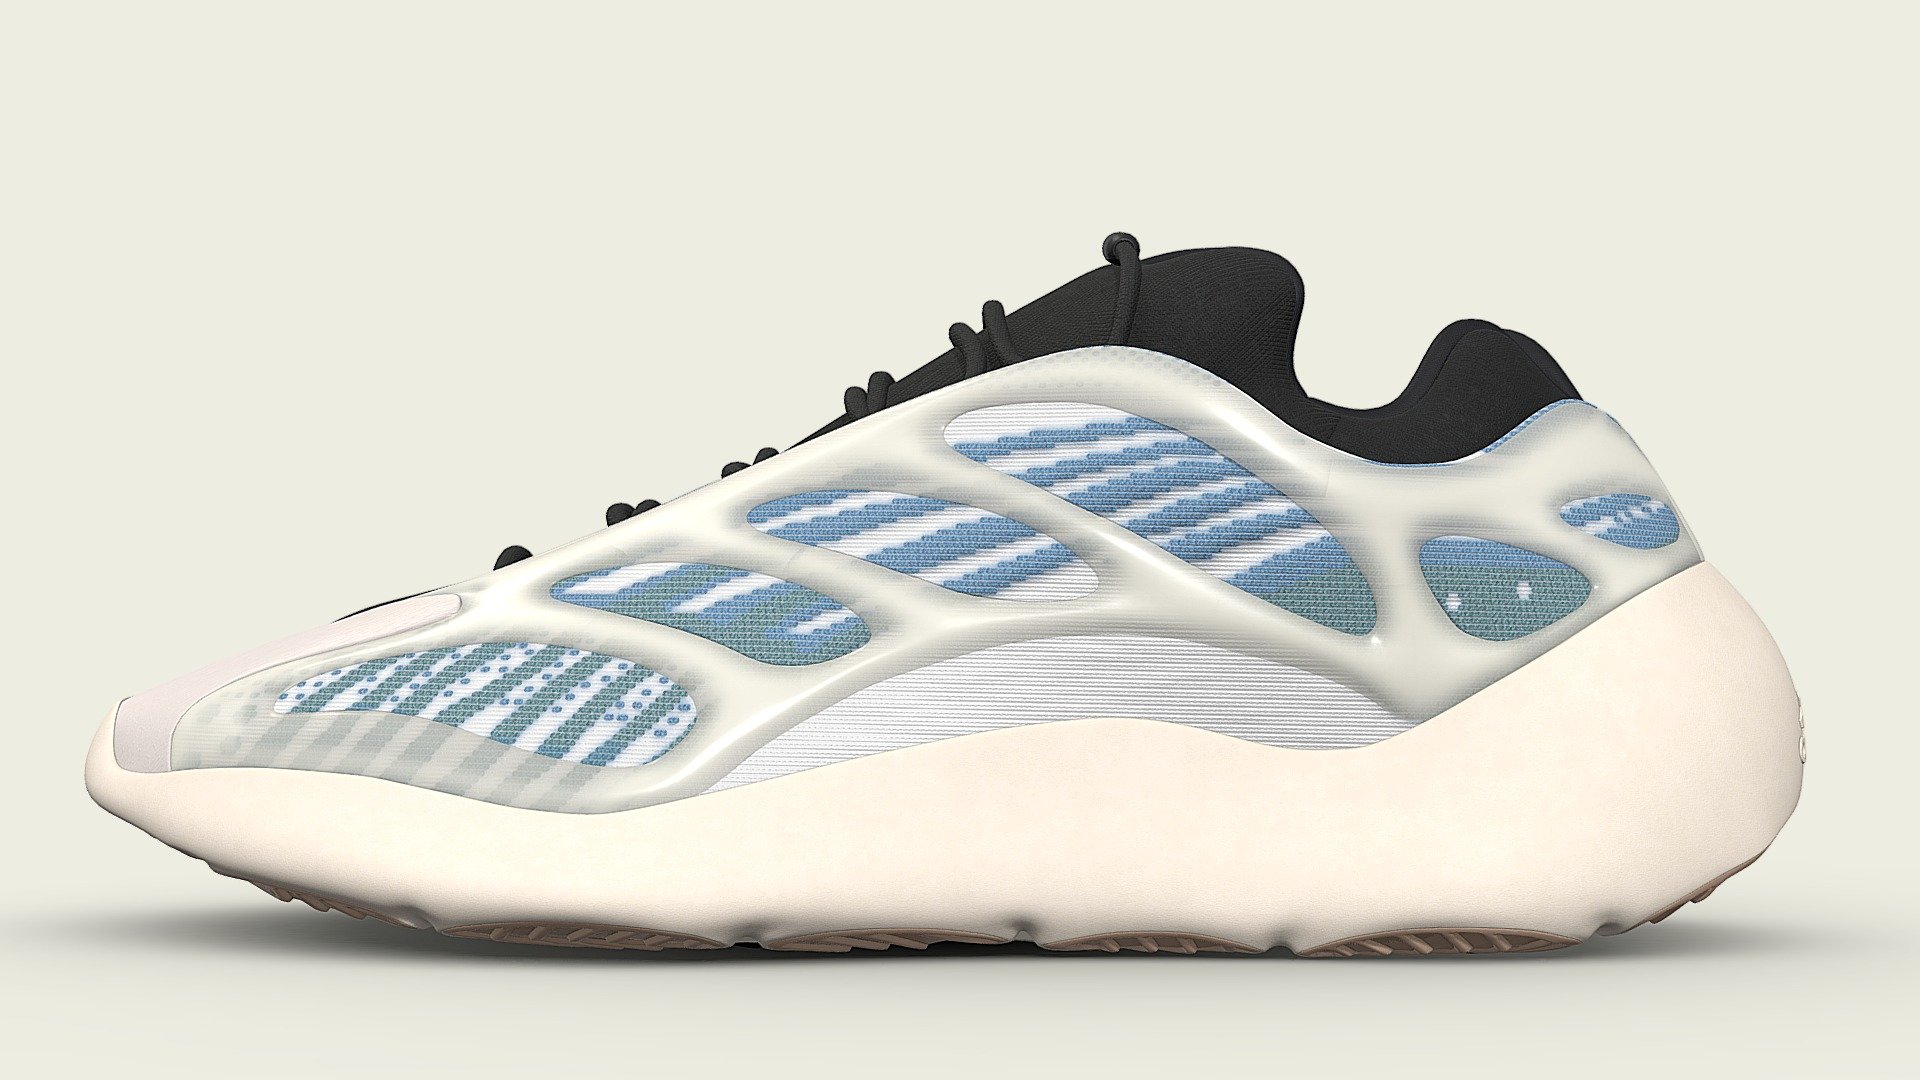 The third incarnation of the Yeezy 700 combines a sophisticated design with the most popular shoe brand on the market. The Kyanite colourway matches blue and green stripes with a white canvas, creating a subtle, toned down look. 

**Modelled in Blender, textured in Substance Painter **

This model was created using the real shoe as reference to ensure the highest quality possible. The model is also subdivision ready, the base model is low poly and can be subdivided to achieve the renders in the preview, full details on polycount below.

The blender file comes complete with the nodes set up and textures attached. Fbx and Obj versions are available
Each shoe has three materials, Top, Middle, and Bottom. Textures are 4096x4096 and the following are provided: Base_Color Height Metallic Normal Roughness
The opacity is linked with the Base_color, but a seperate file can be provided if required. All textures are in png format

If you have any questions or require any assistance contact me 3d model